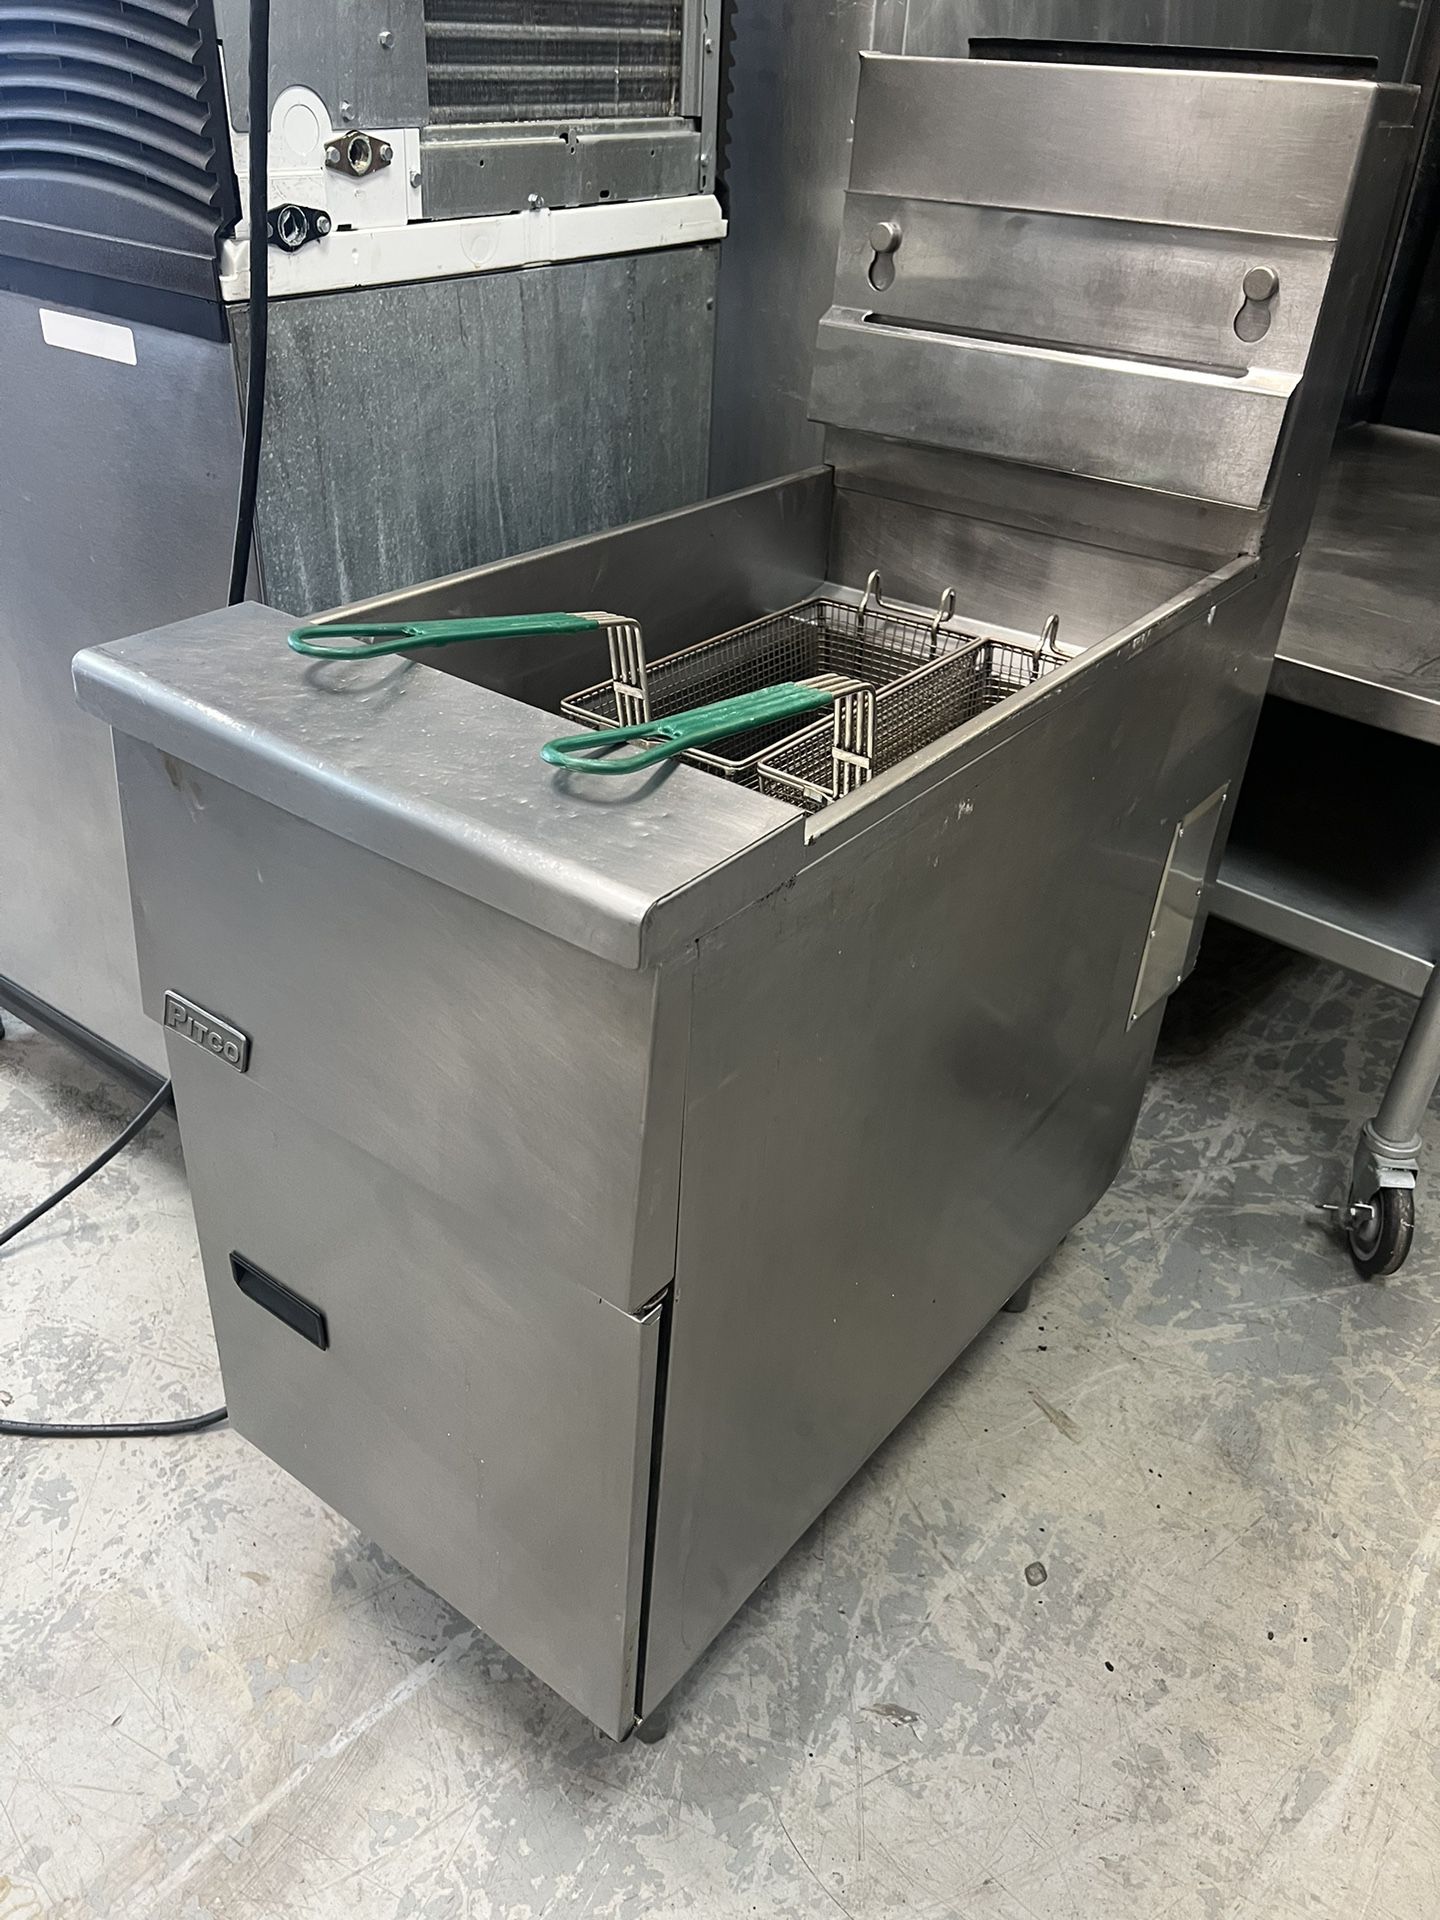 Oster Compact Deep Fryer for Sale in Pompano Beach, FL - OfferUp